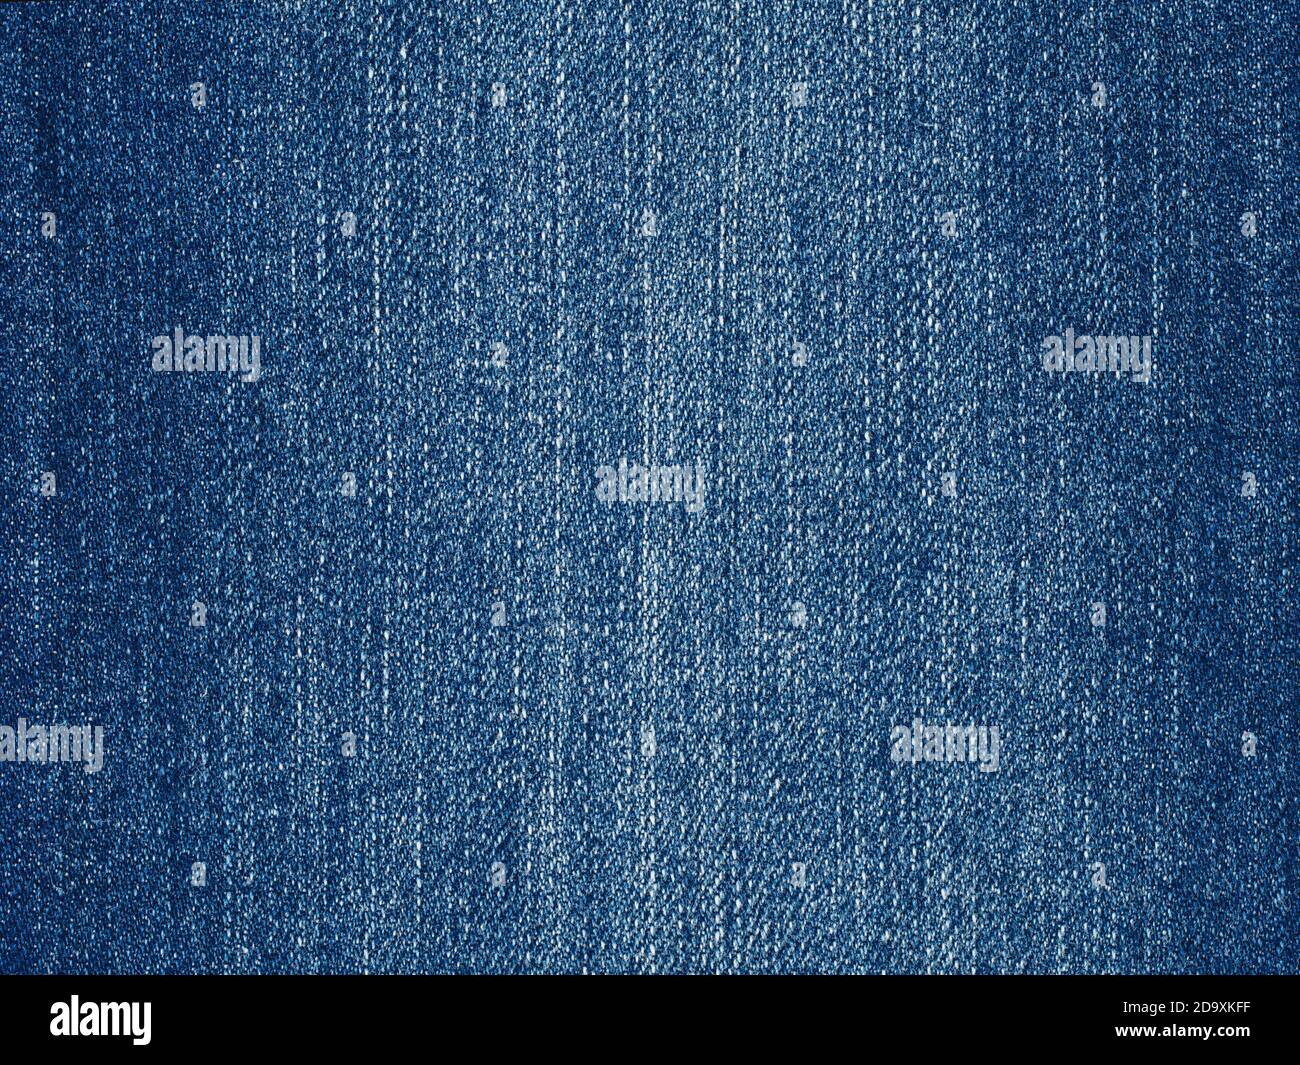 Fabric Swatch Denim High Resolution Stock Photography and Images - Alamy